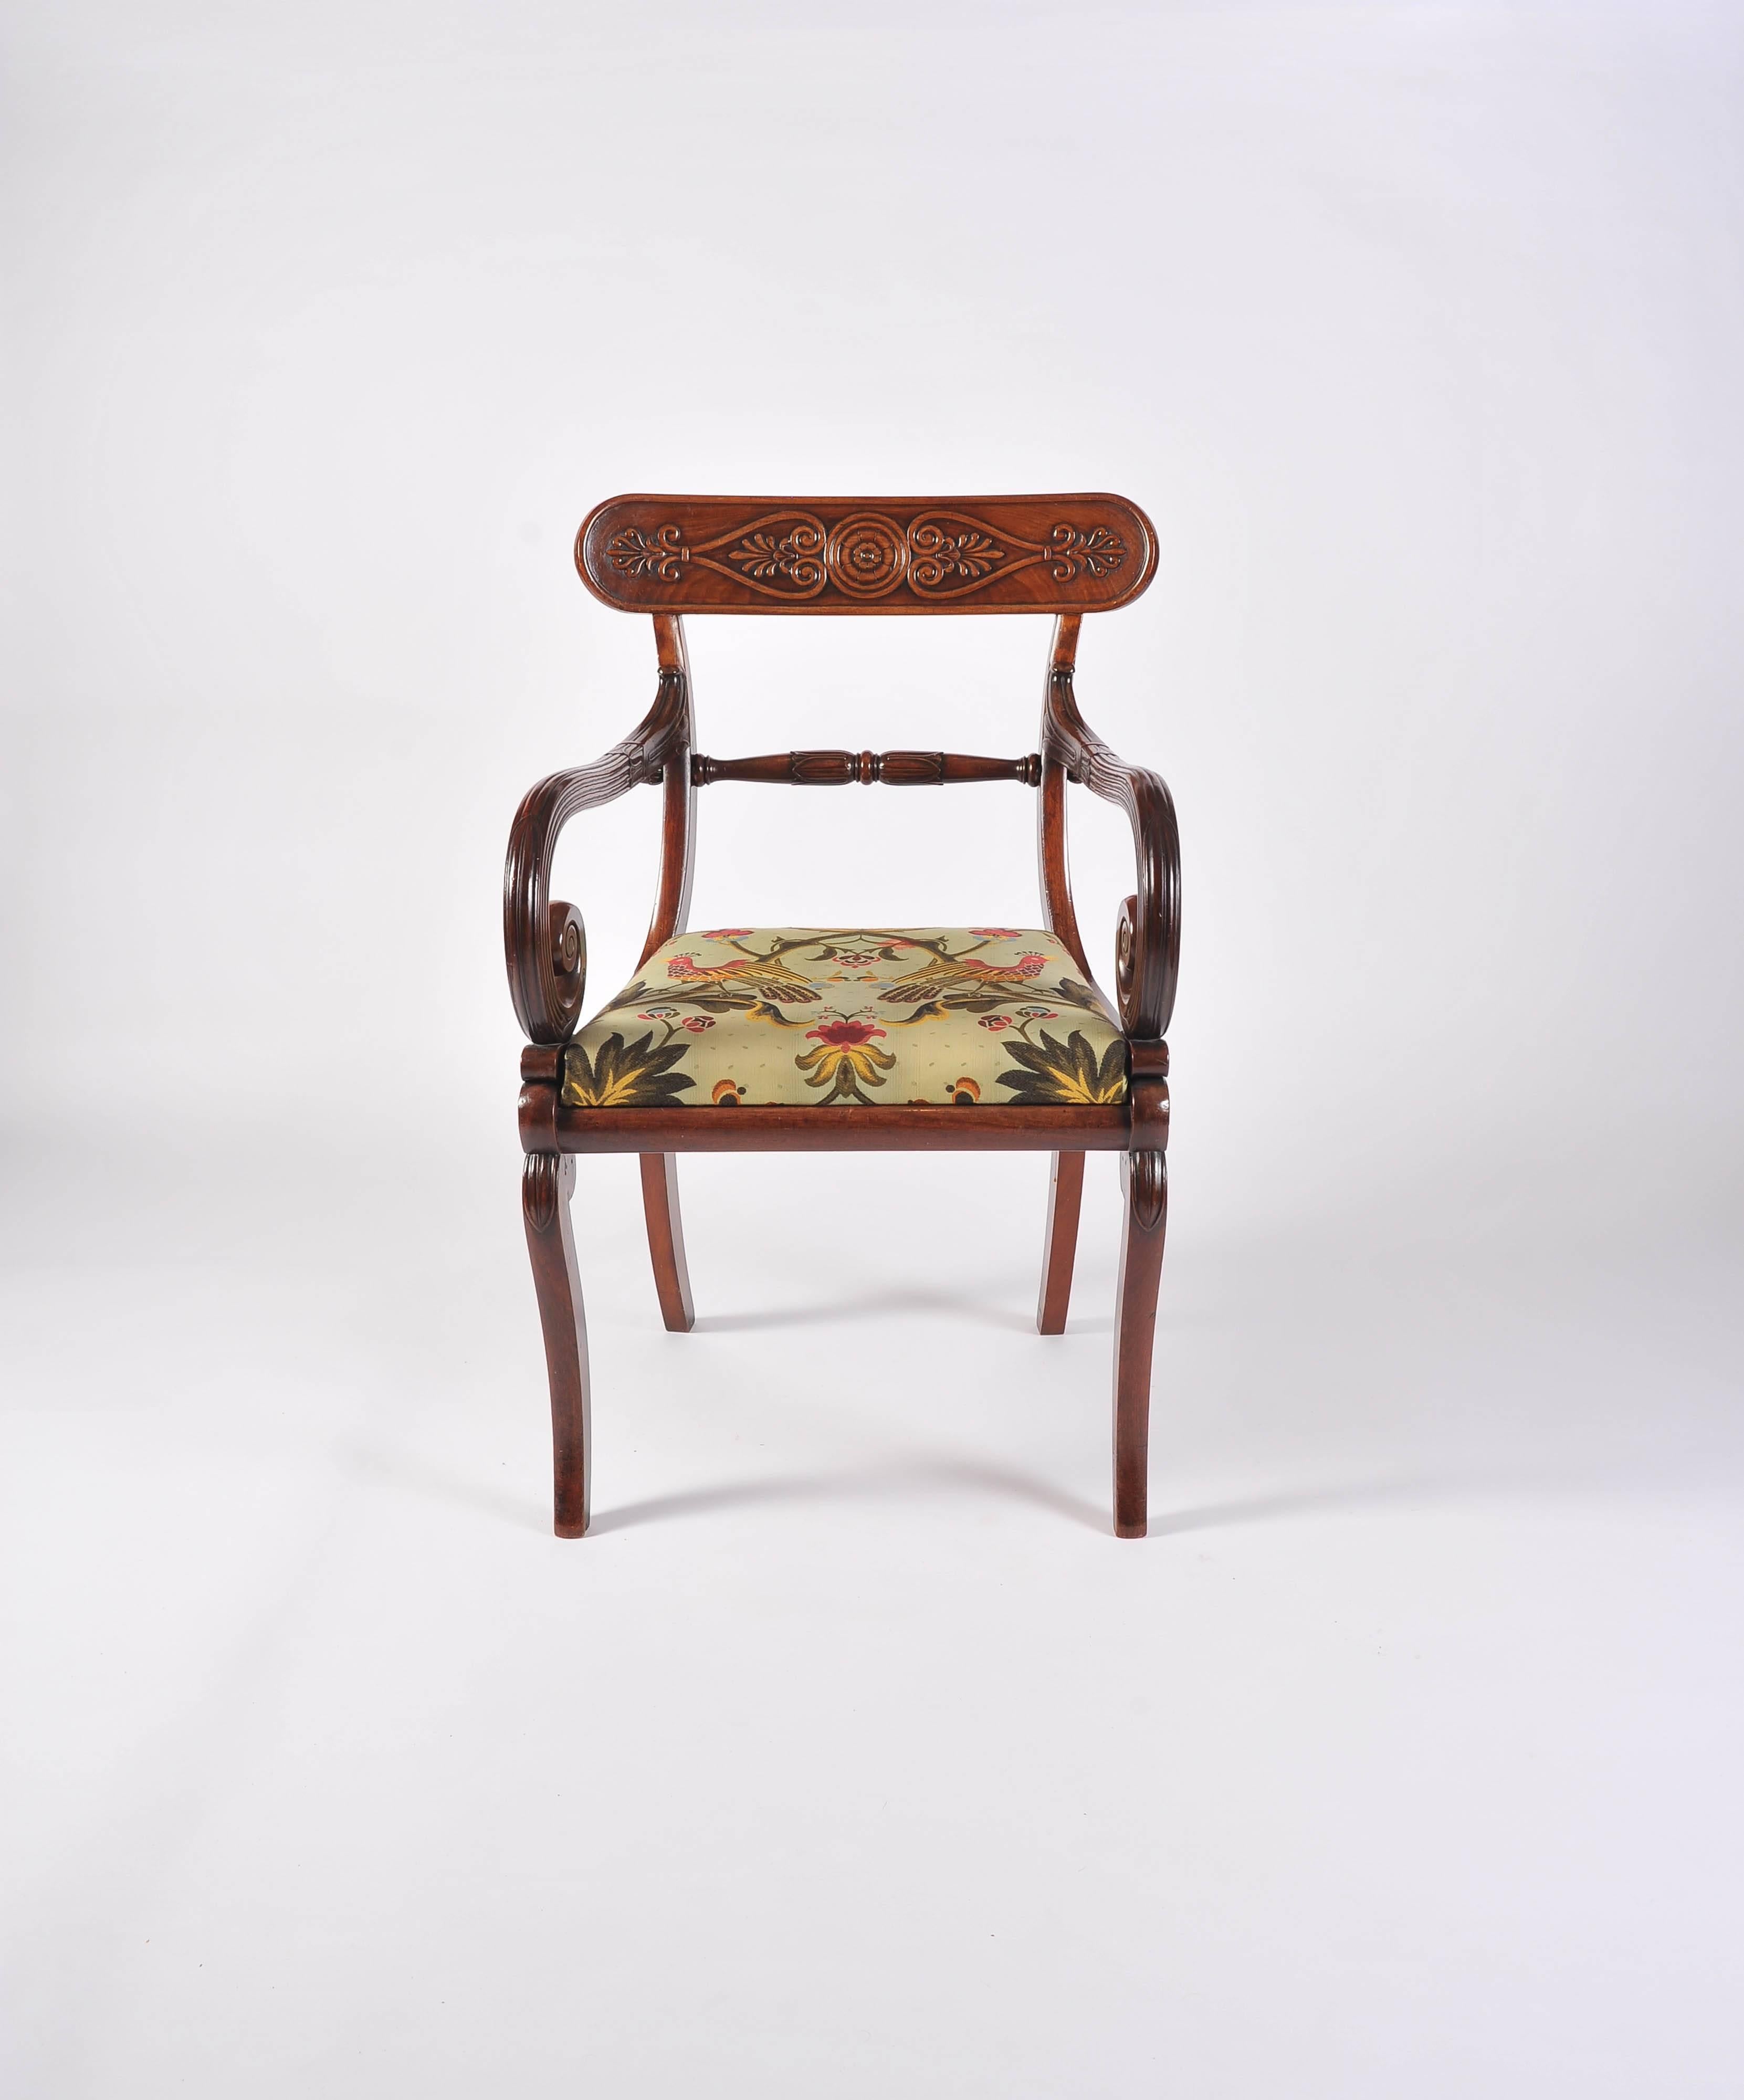 Mahogany Desk Chair, French Empire Period, Cabriole Legs, Early 19th Century In Excellent Condition For Sale In London, GB